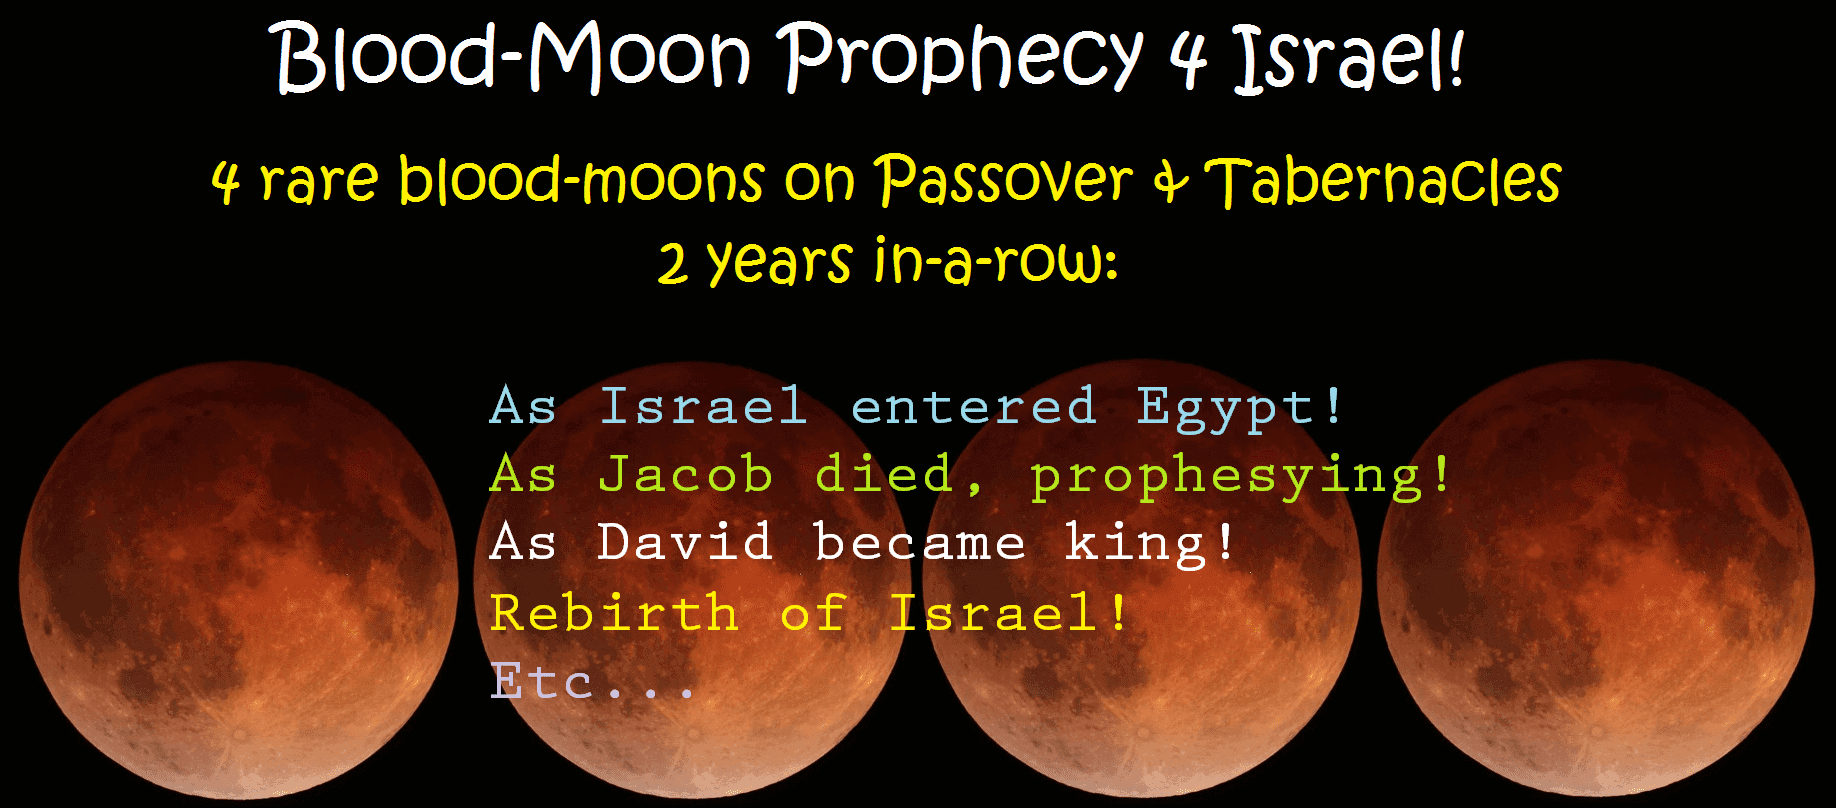 Blood-Moon Prophecy (Israel's Passover-Tabernacles Tetrads)